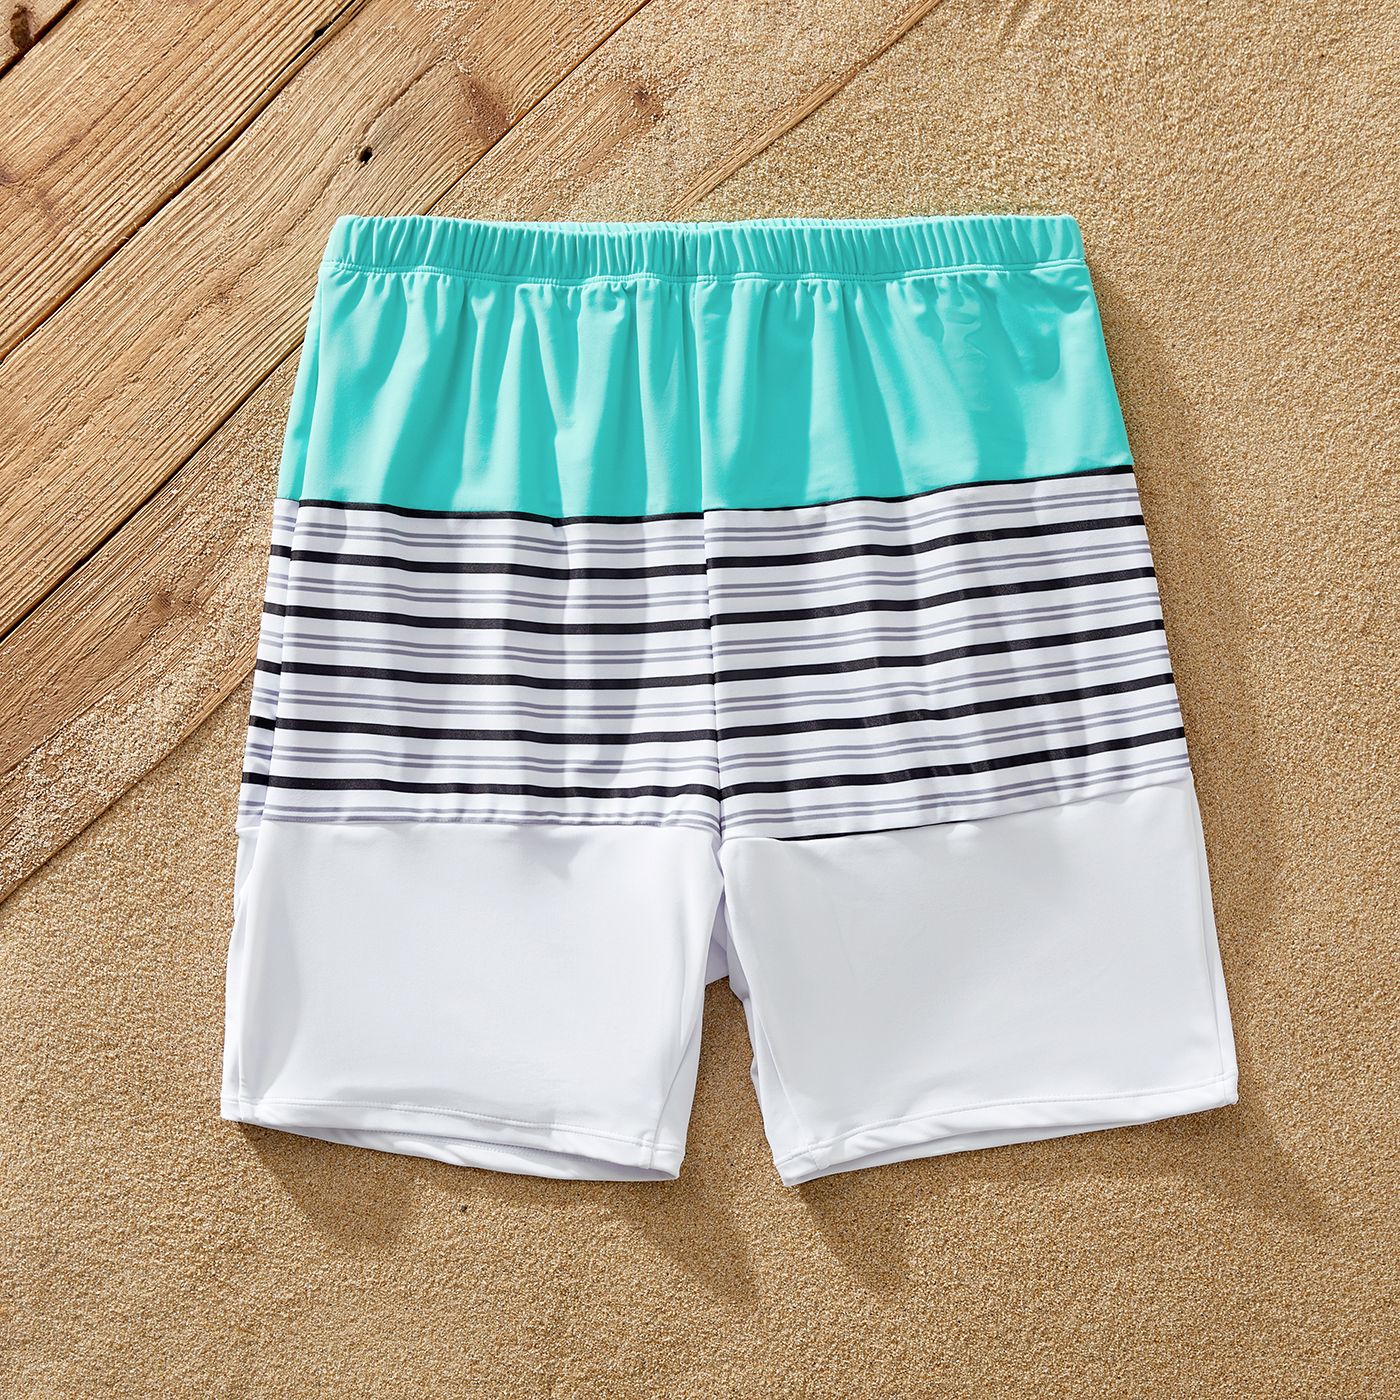 Family Matching Ruffled Twist Front One-piece Swimsuit Or Stripe Panel Swim Trunks Shorts